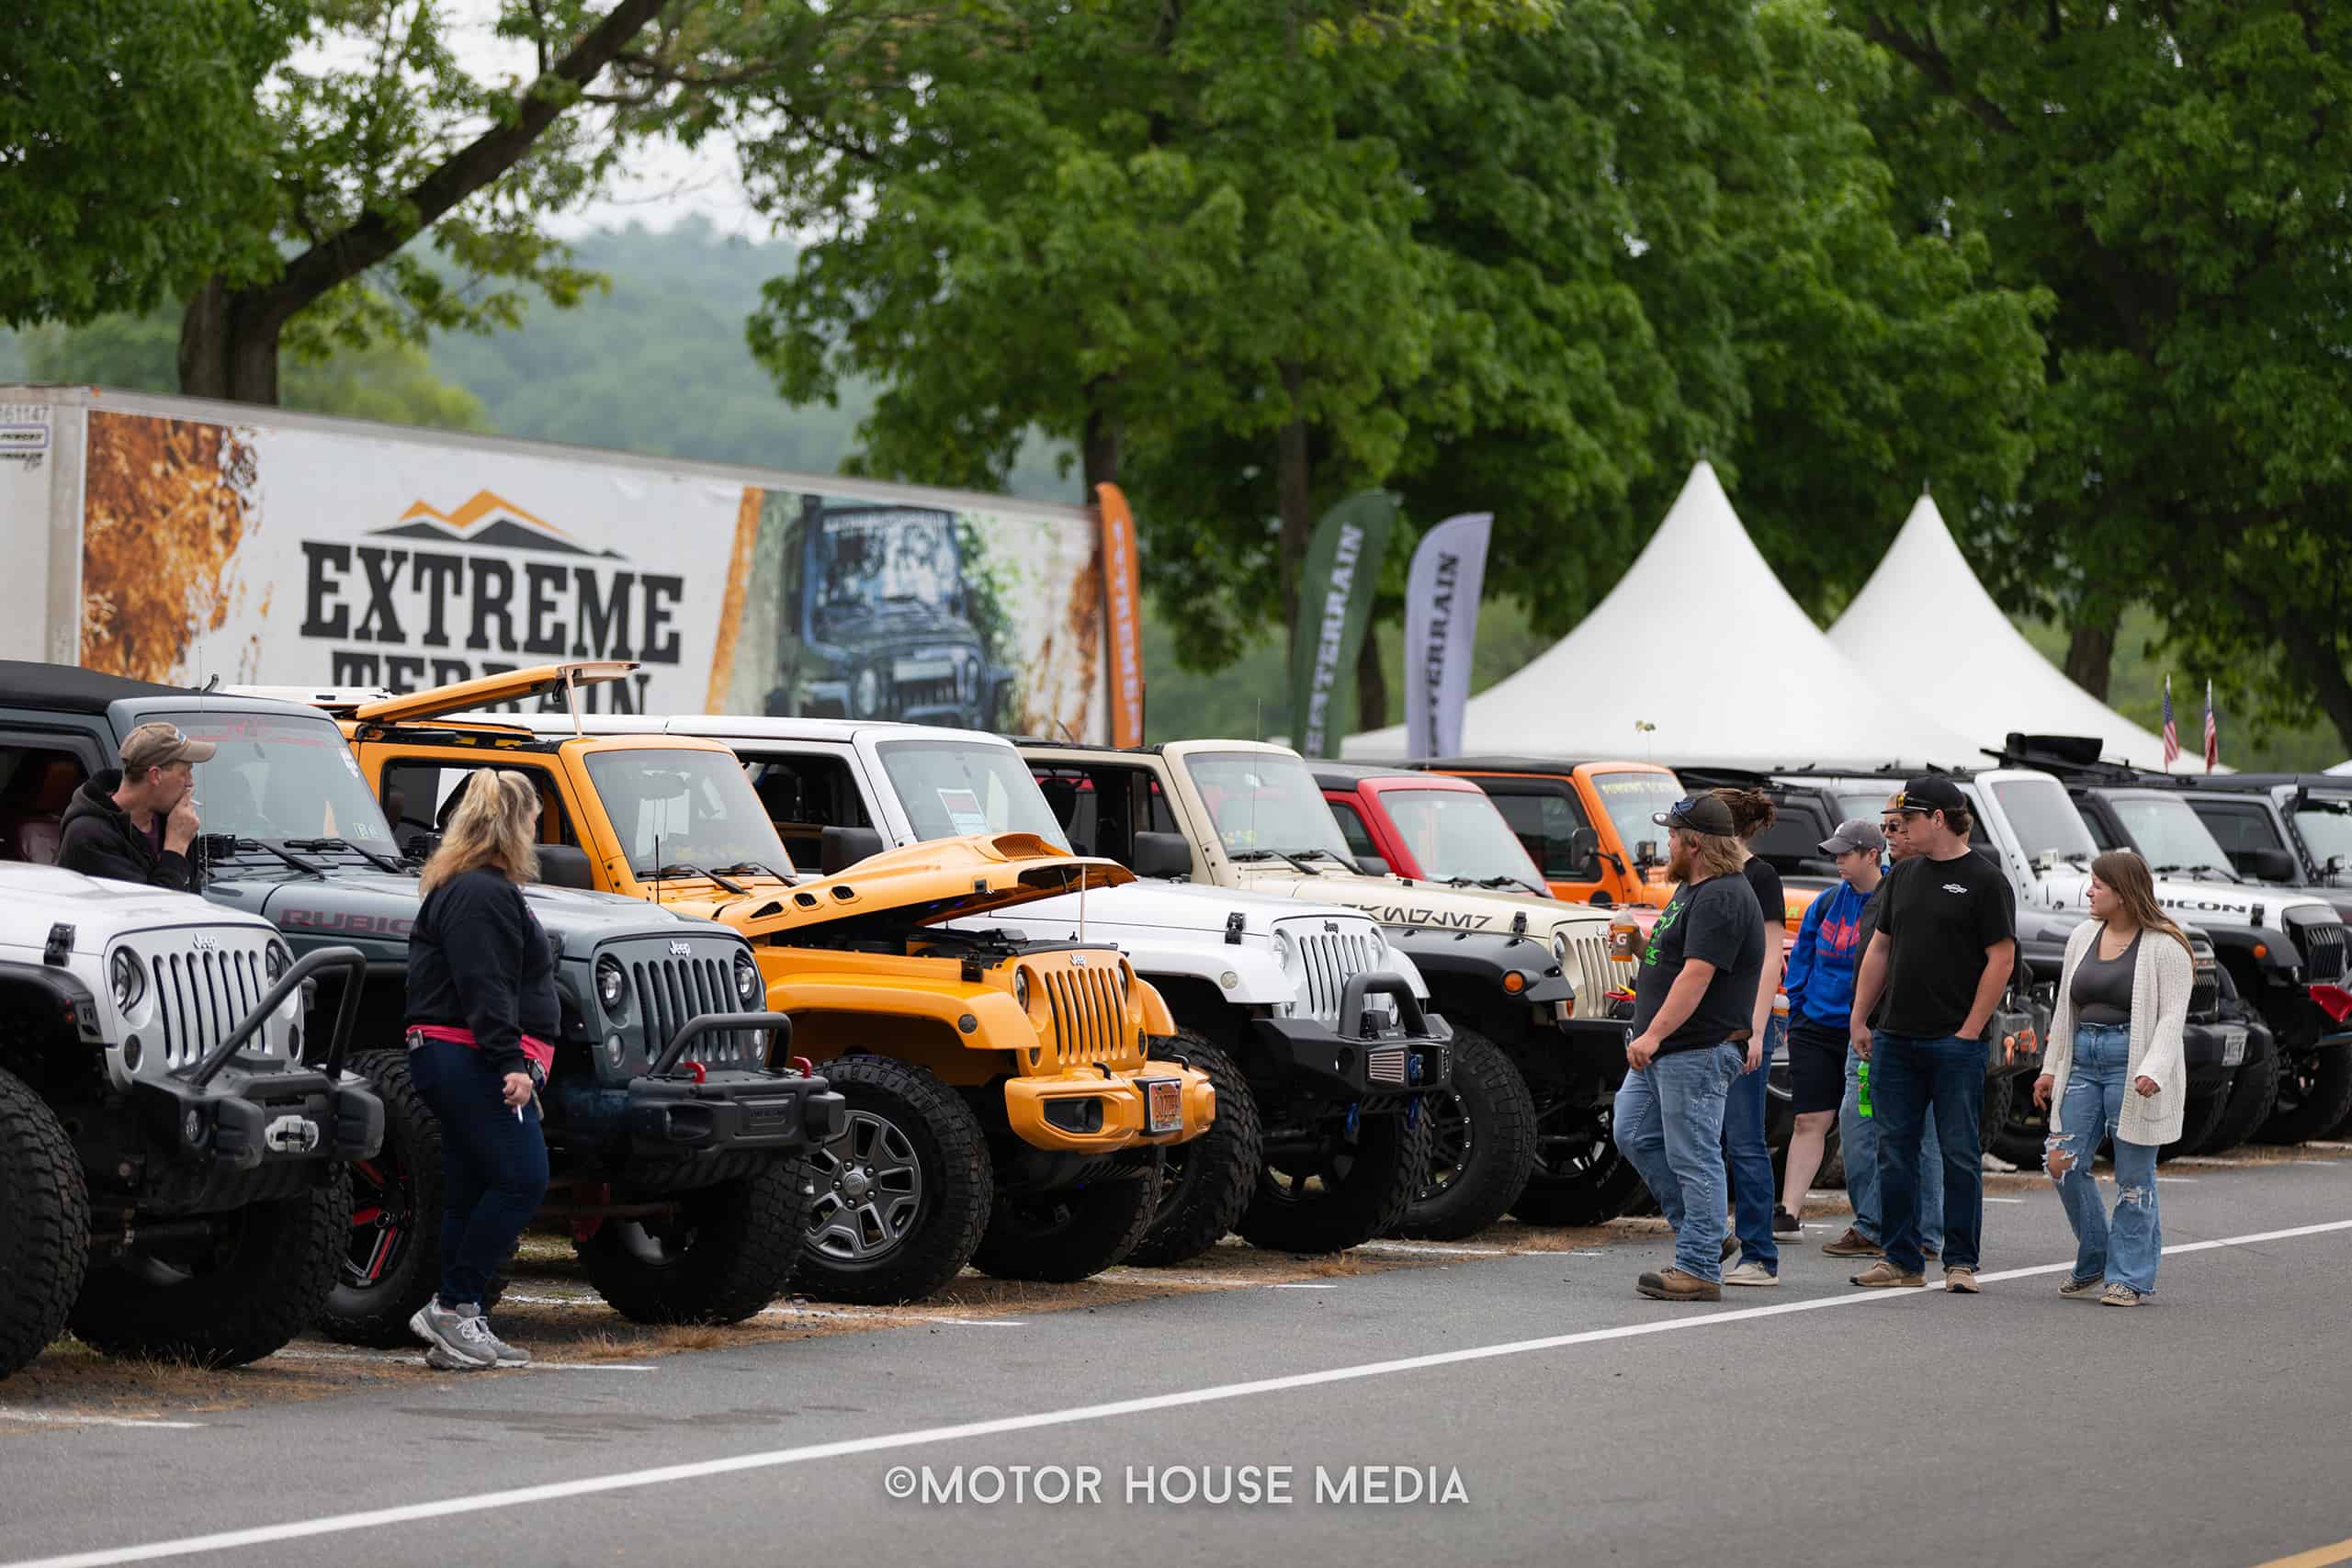 The Turn 5 Auto Show featuring Muscle Cars, Trucks, Jeeps and SUVs. Having raised more than $400k to-date, through this event Turn5 continues supporting Make-A-Wish Philadelphia, Delaware & Susquehanna Valley and its wish granting program serving critically ill children.